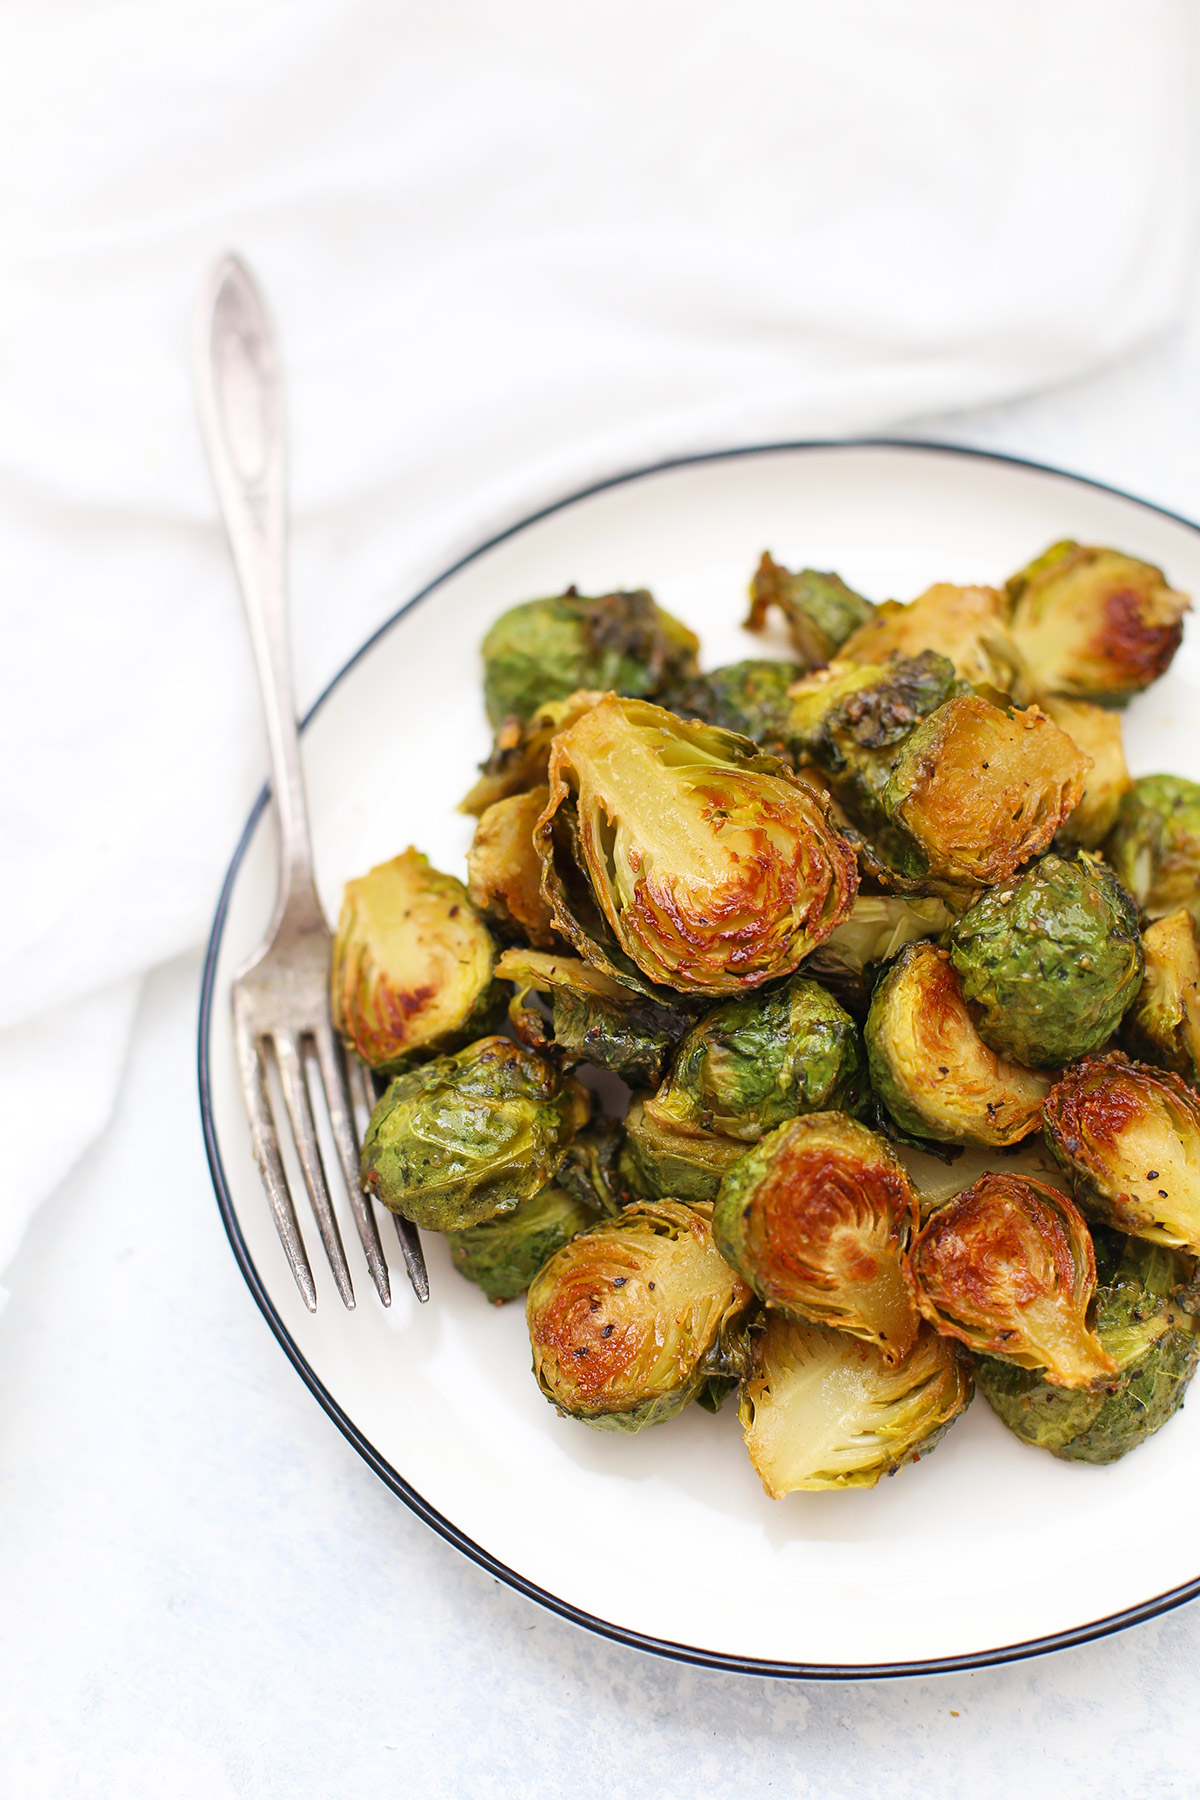 These easy Maple Dijon Brussels Sprouts are one of my favorite easy side dishes! Perfect for Thanksgiving, or a weeknight! (Gluten free, vegan, paleo) 